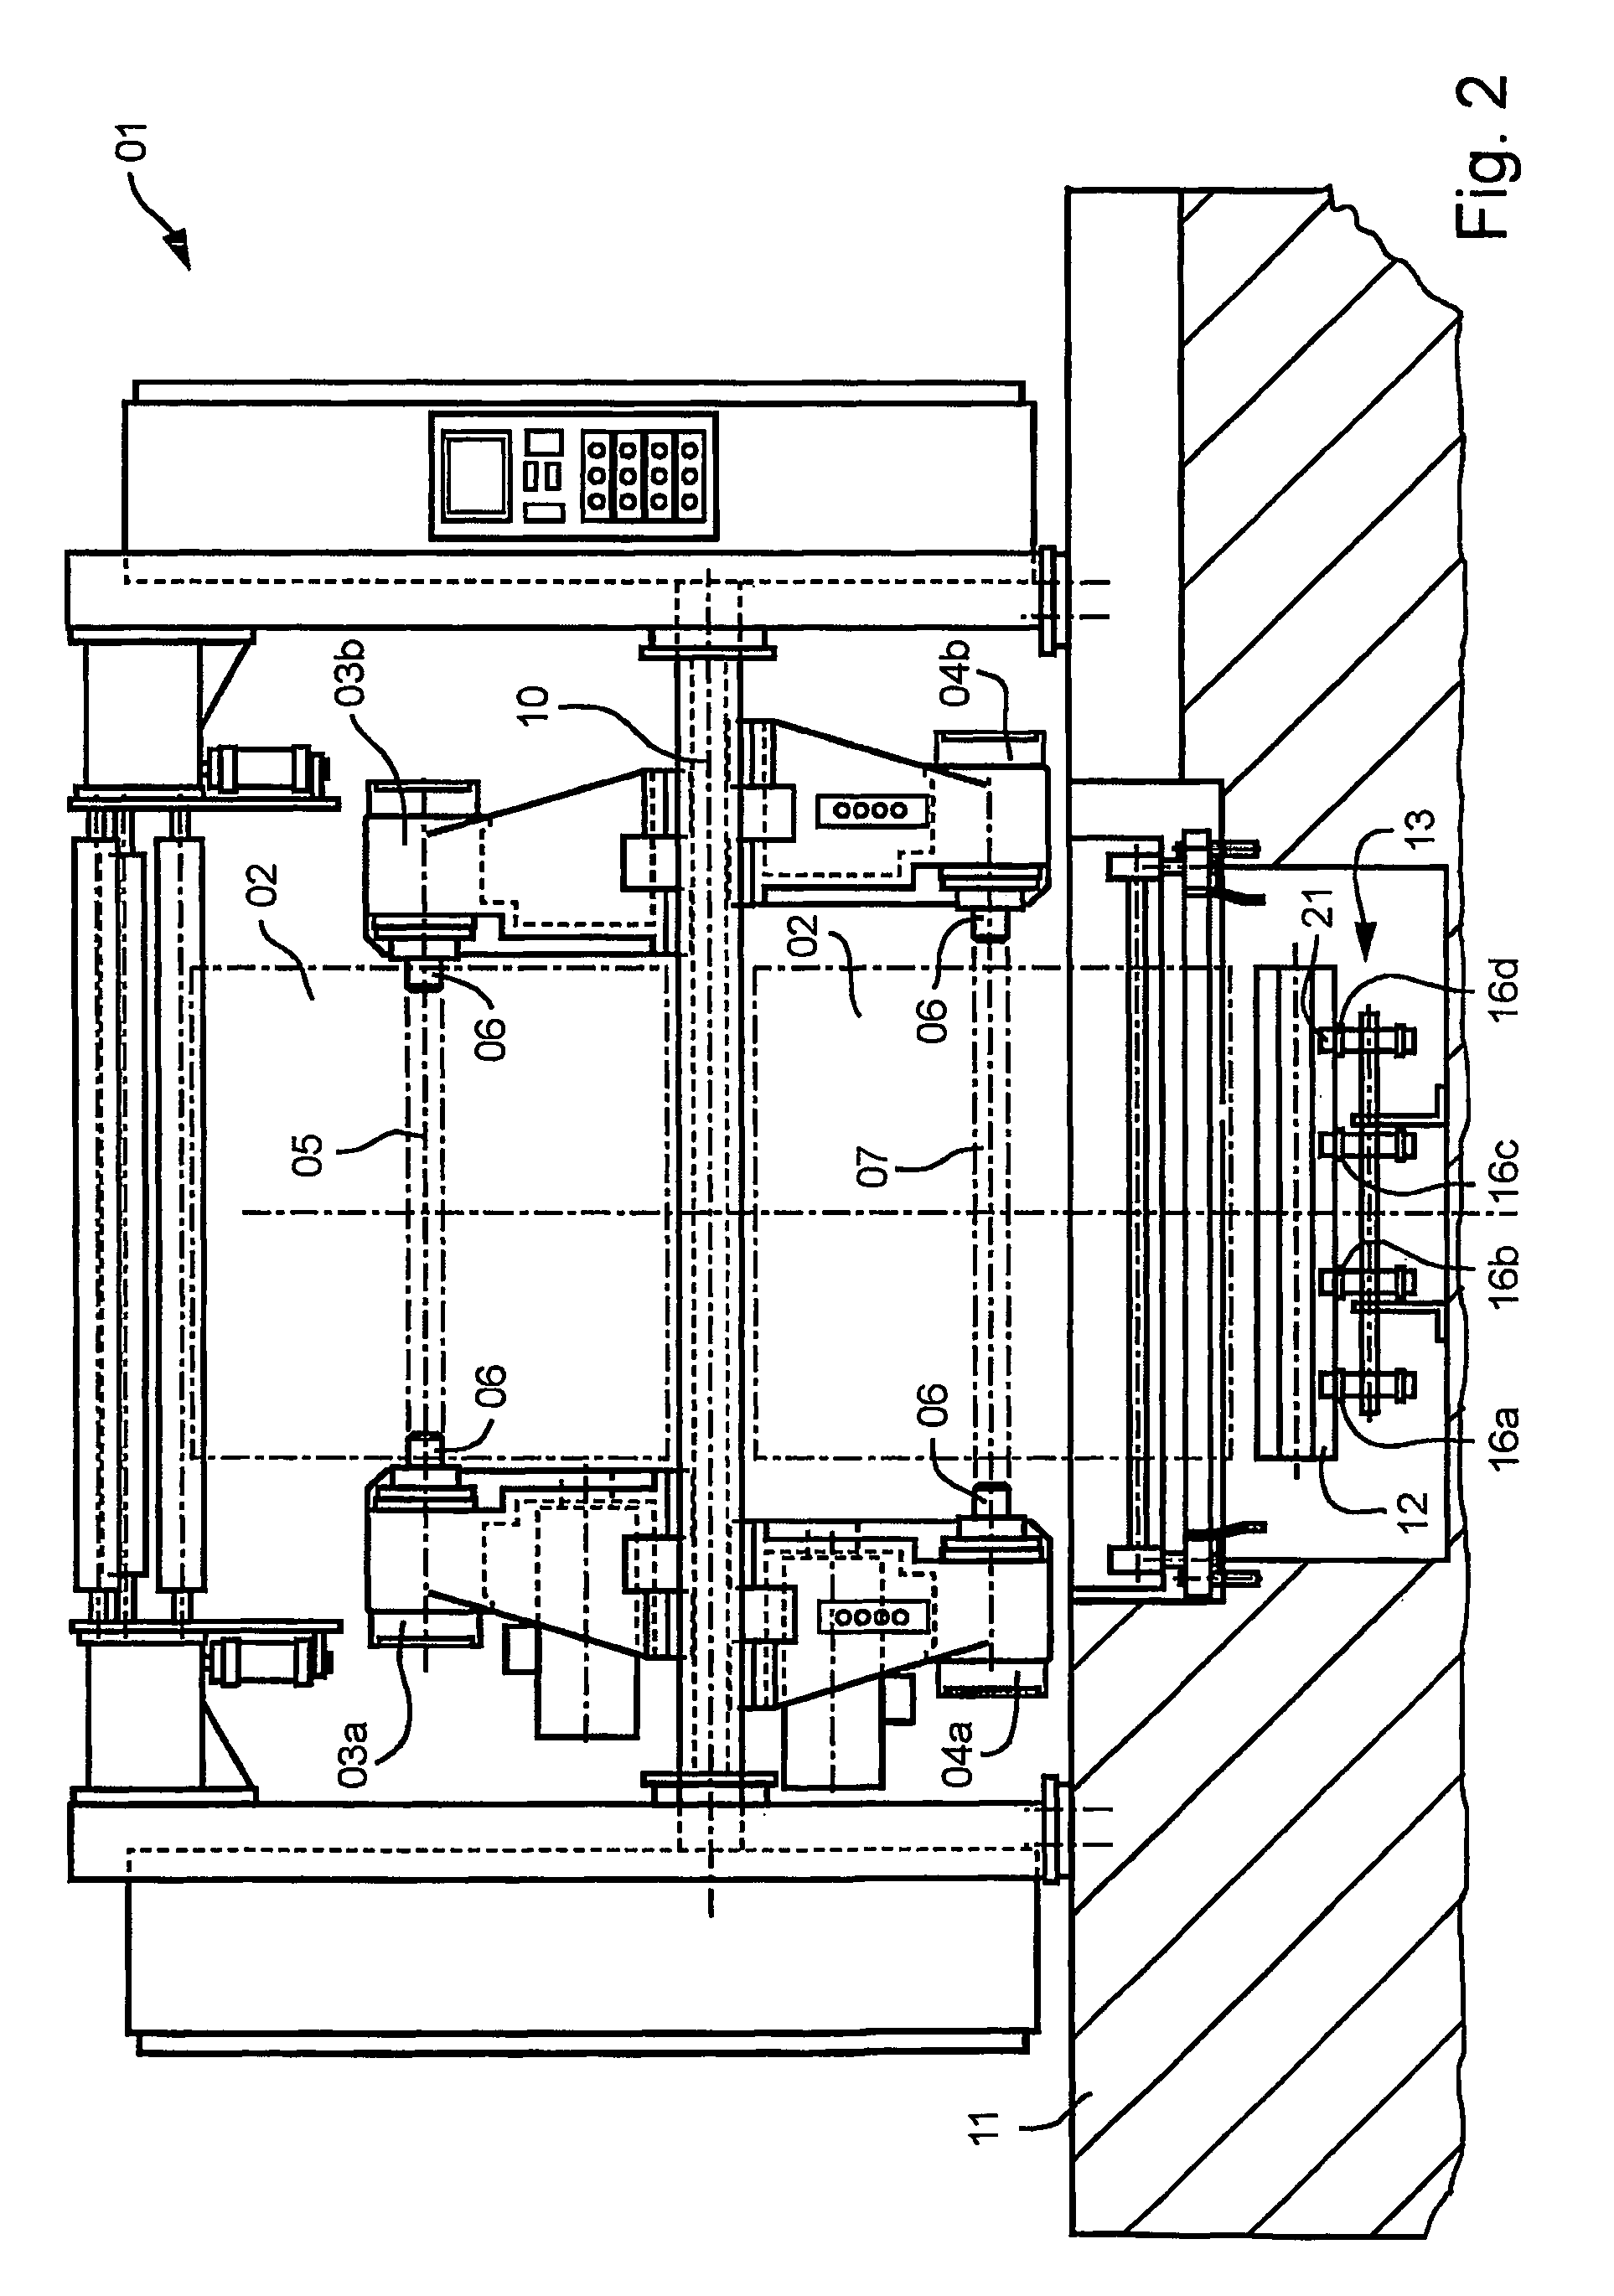 Automatic reel changer comprising a reel stand and a method for disposing of residual reel casings